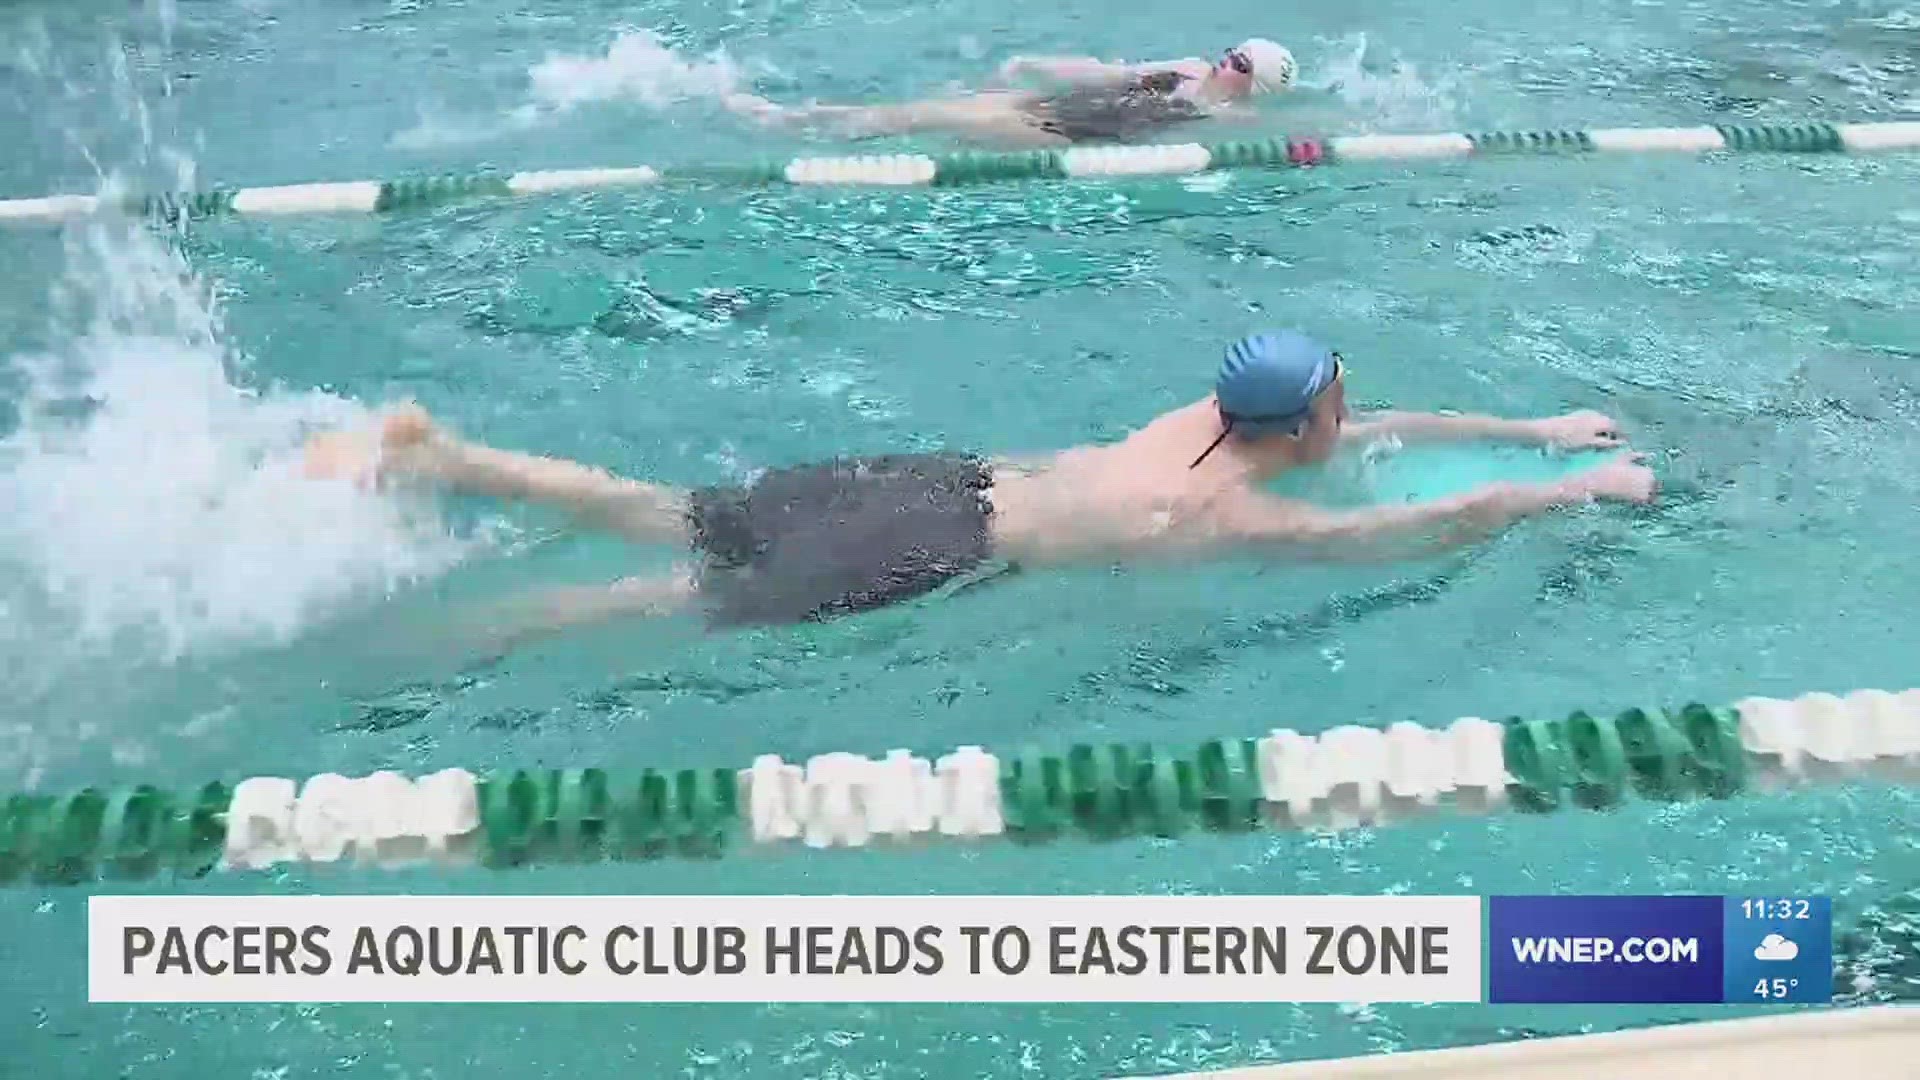 The Pacers Aquatic Club trains at Marywood University